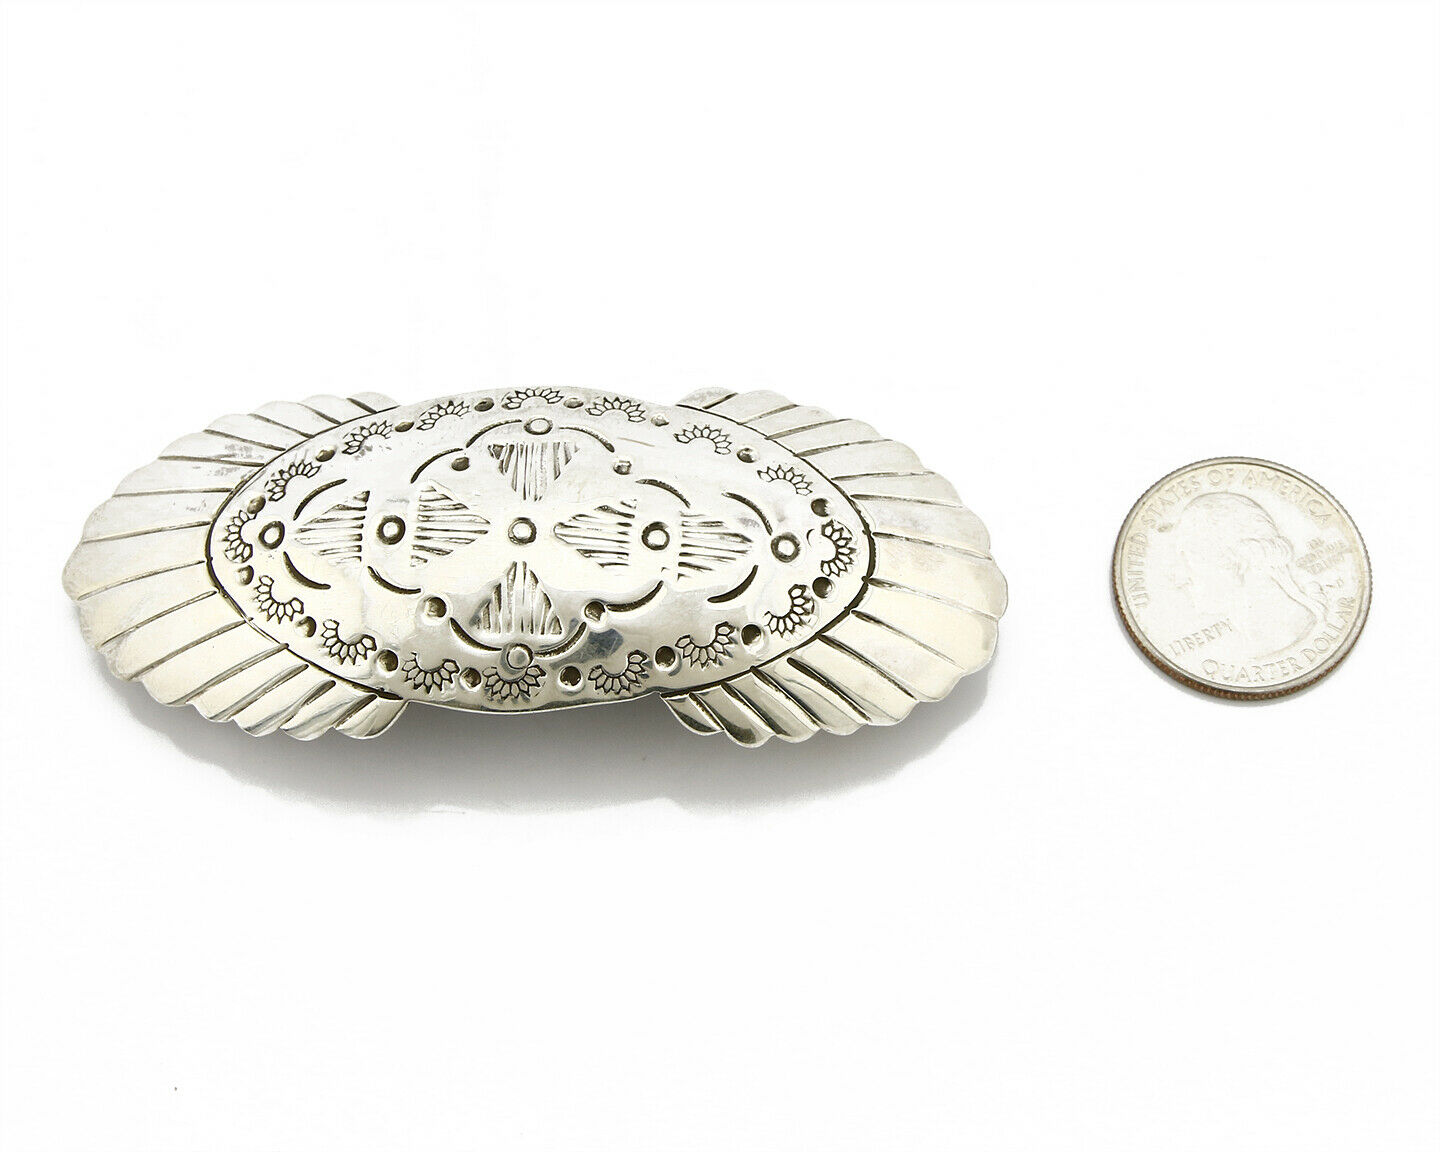 Navajo Handmade .925 SOLID SILVER Hand Stamped 36mm Wide Barrette Hair Clip